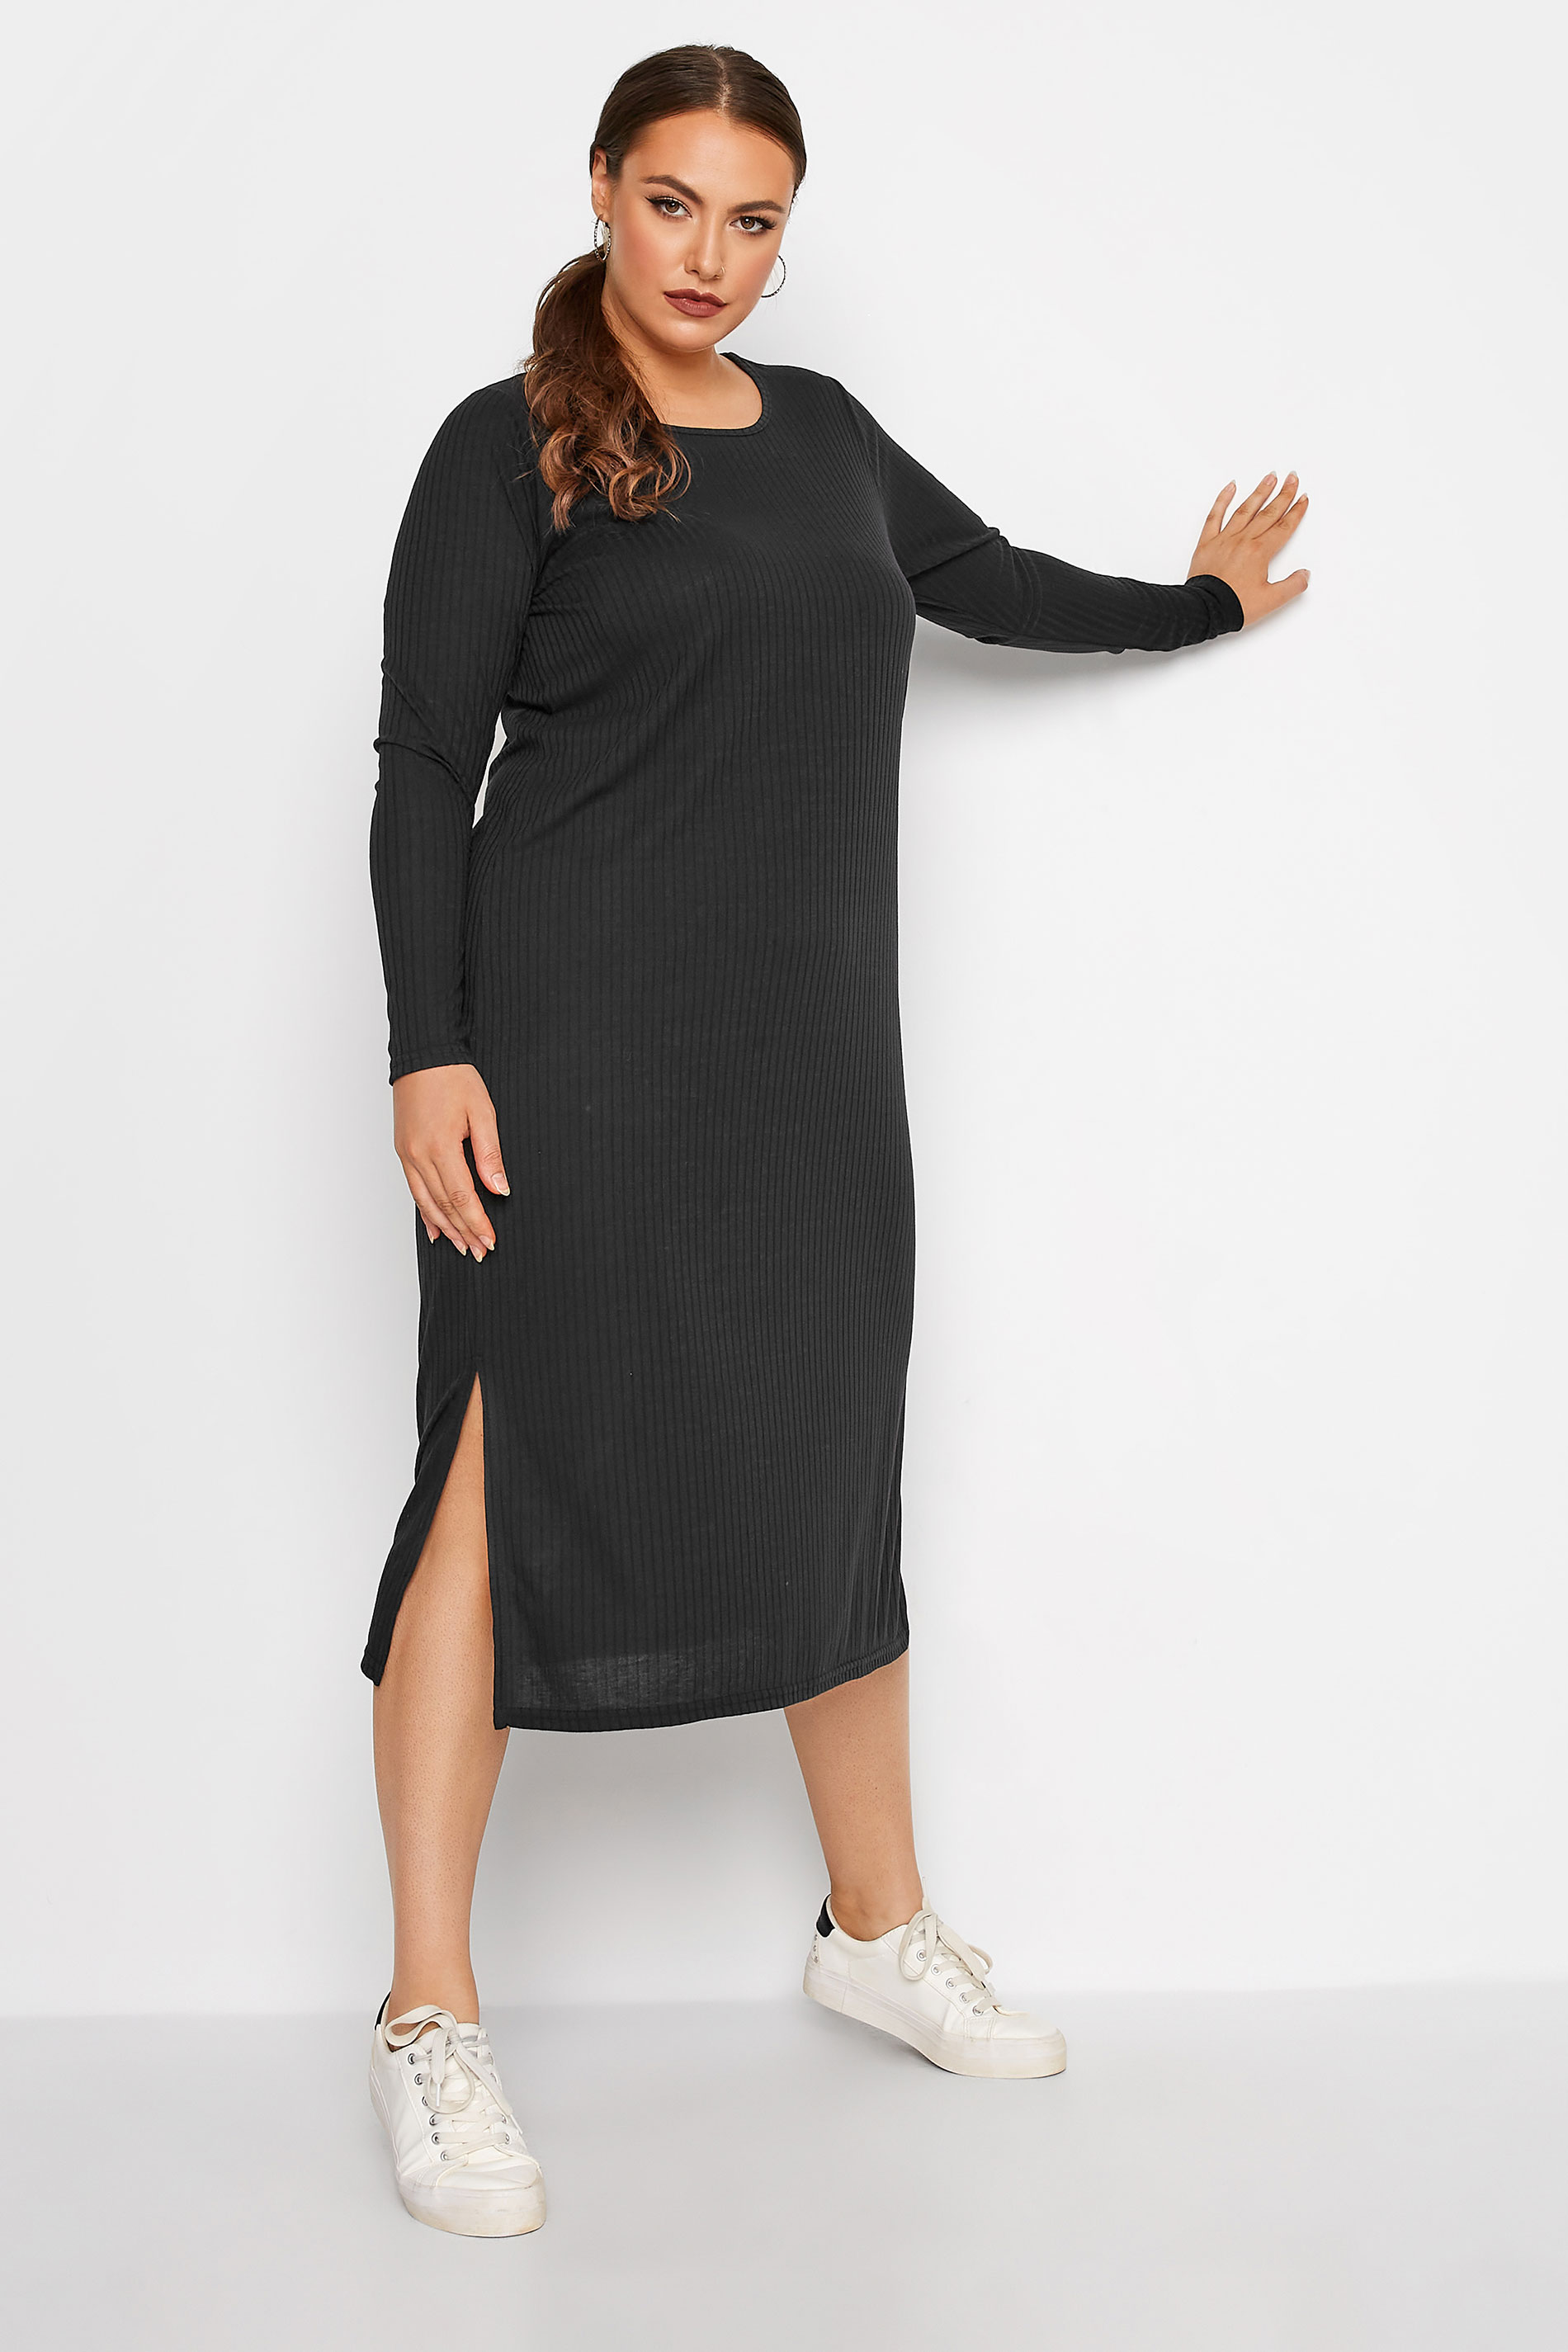 LIMITED COLLECTION Plus Size Black Ribbed Midi Dress | Yours Clothing  2